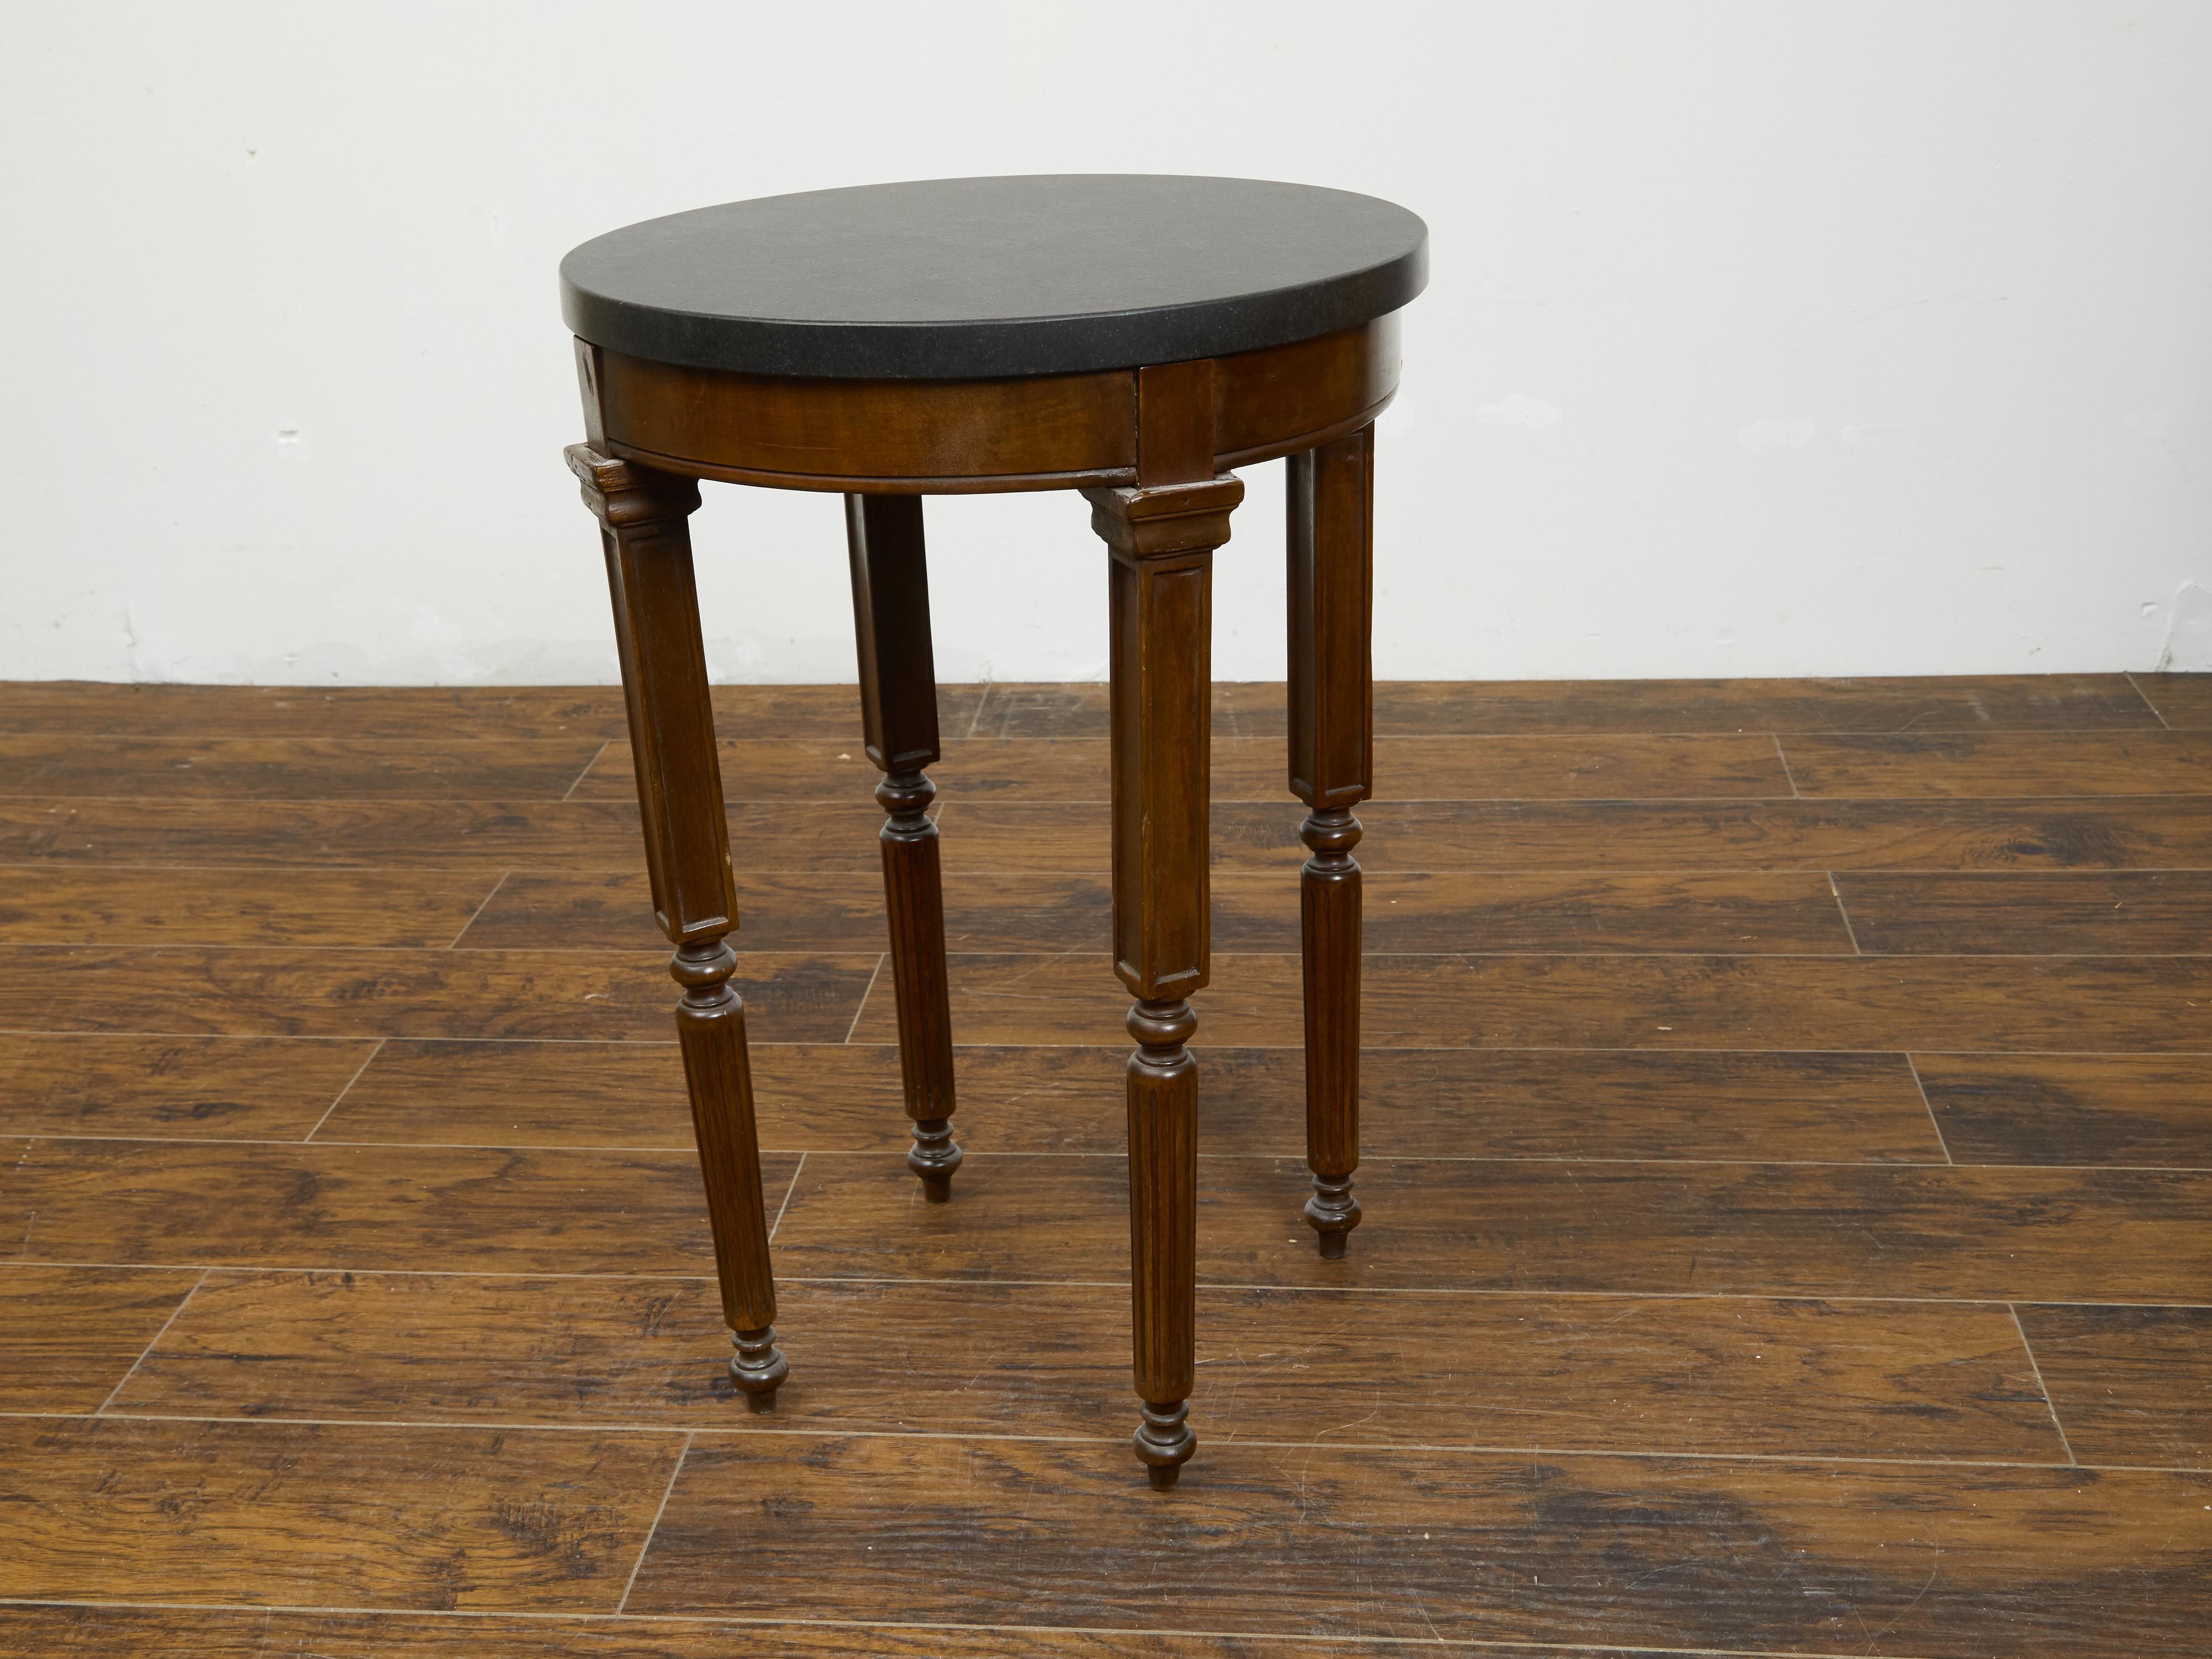 French 19th Century Wooden Guéridon Table with Circular Black Marble Top For Sale 5